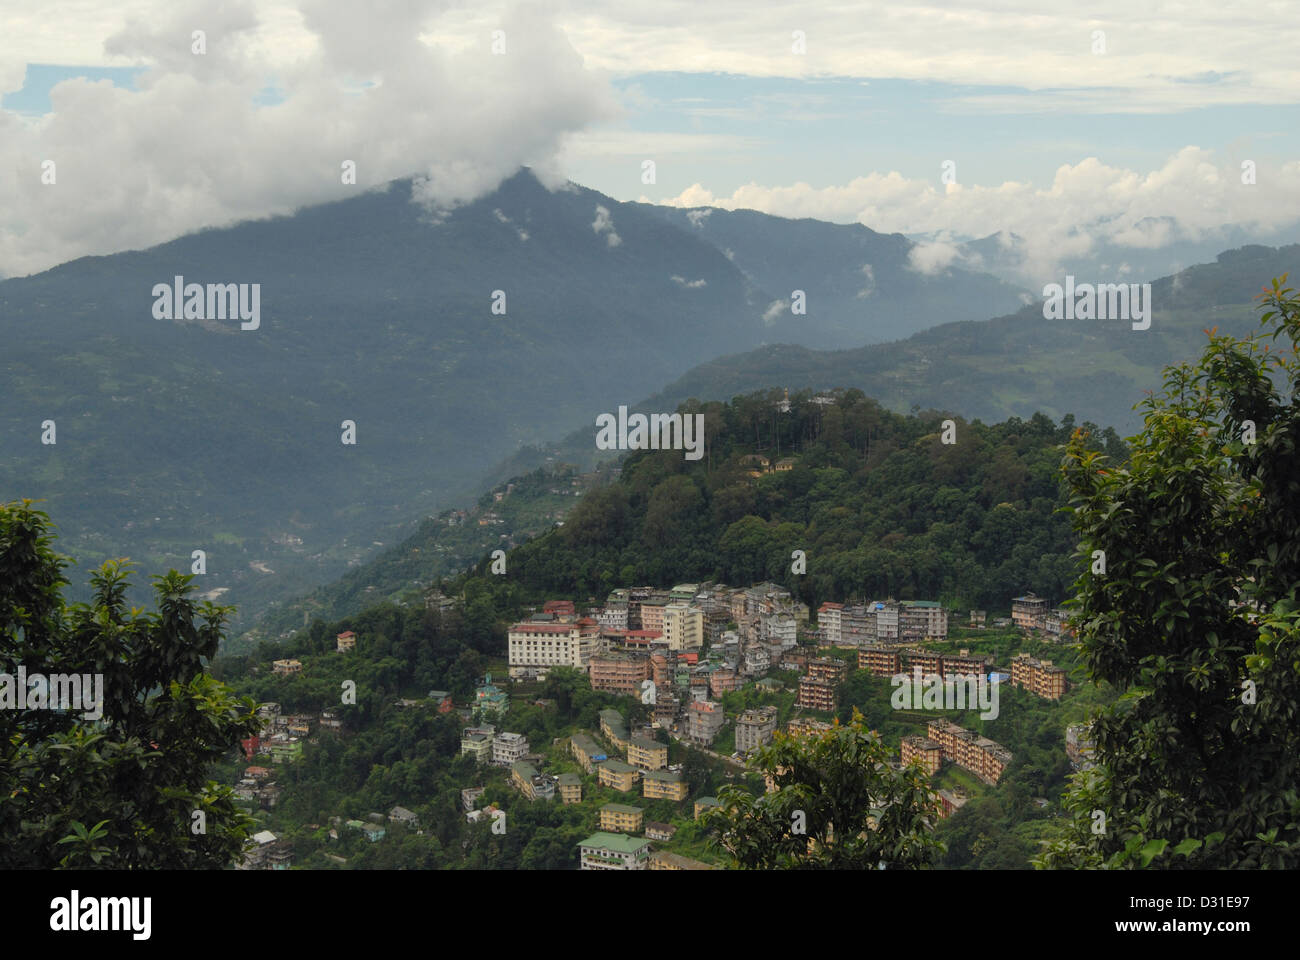 General-View of one of the hills at Gangtok (Sikkim). Showing small houses on the slopes. Stock Photo